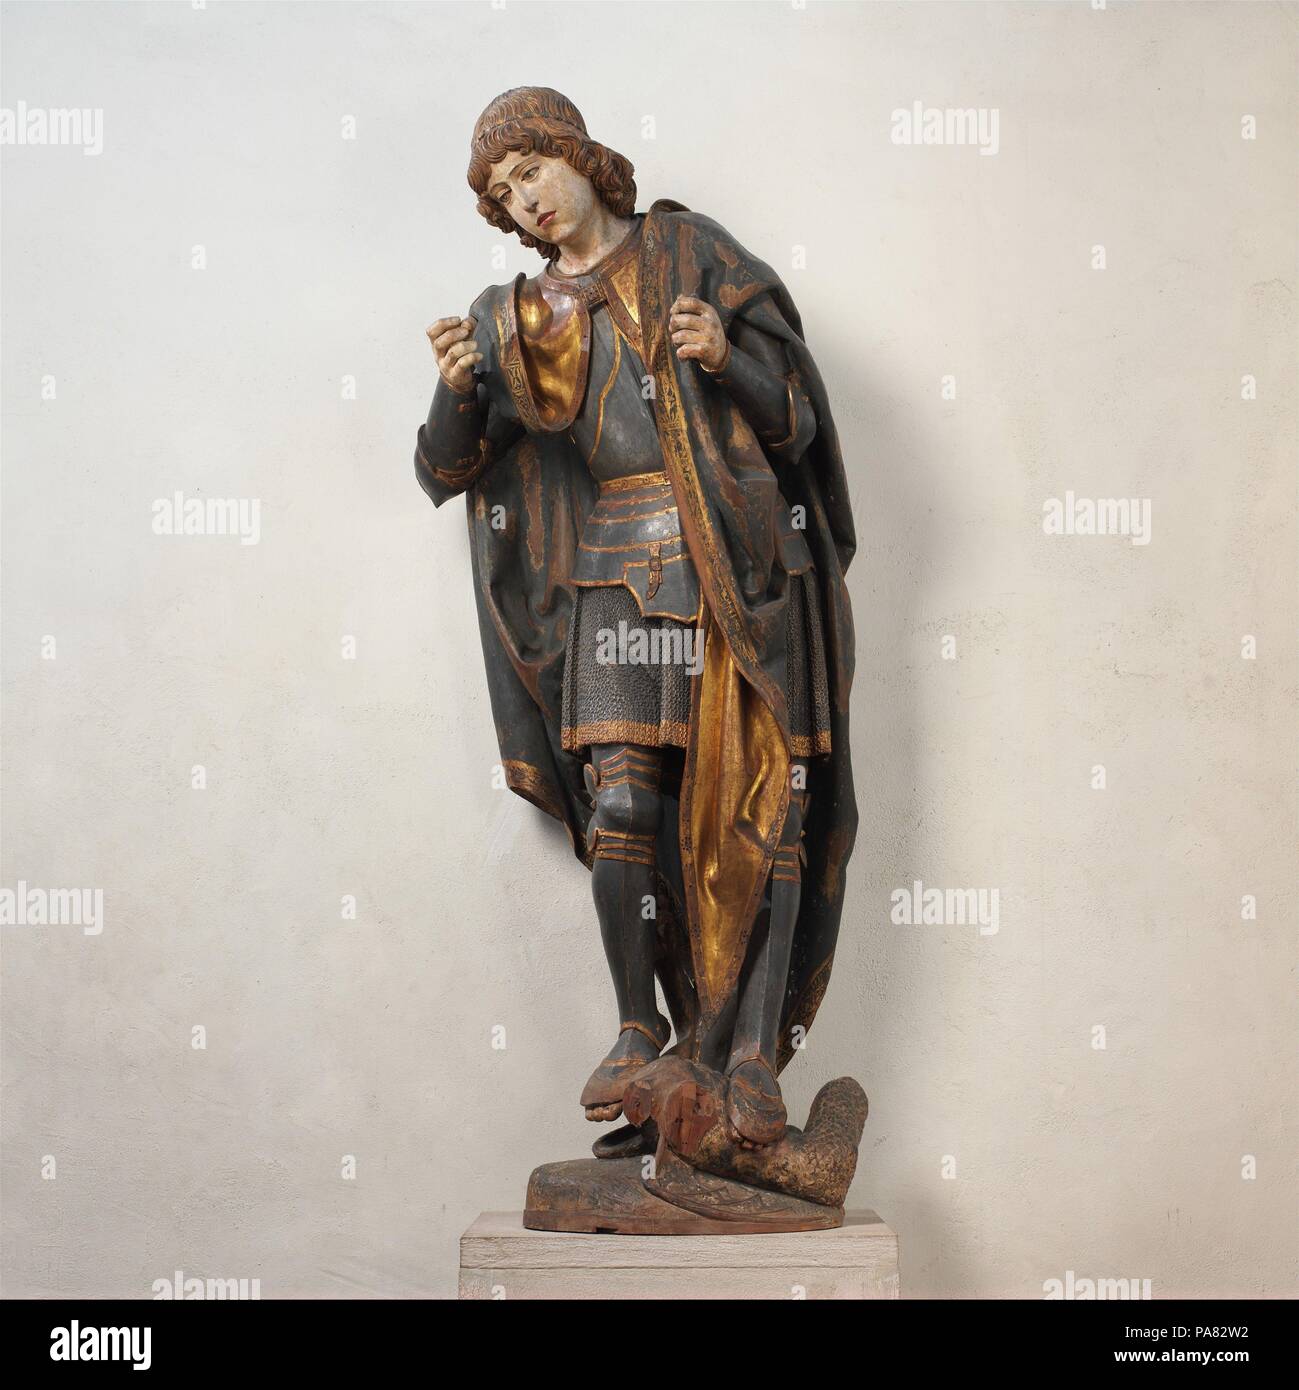 Saint Michael. Culture: Spanish. Dimensions: Overall: 73 1/2 in., 235lb. (186.7 cm, 106.6kg). Date: ca. 1530.  The warrior-archangel Michael, clad in intricately carved and painted armor, treads on a dragon, a symbol of the devil. In his left hand, he carried scales, symbolic of the Last Judgment, to which he summoned earthly souls. Michael's right hand once held a lance, and his wings have been lost. The forward-bending pose and foreshortening indicate that the figure was made to be positioned at a considerable height, perhaps above or flanking the central shrine of a large retable. Museum: M Stock Photo